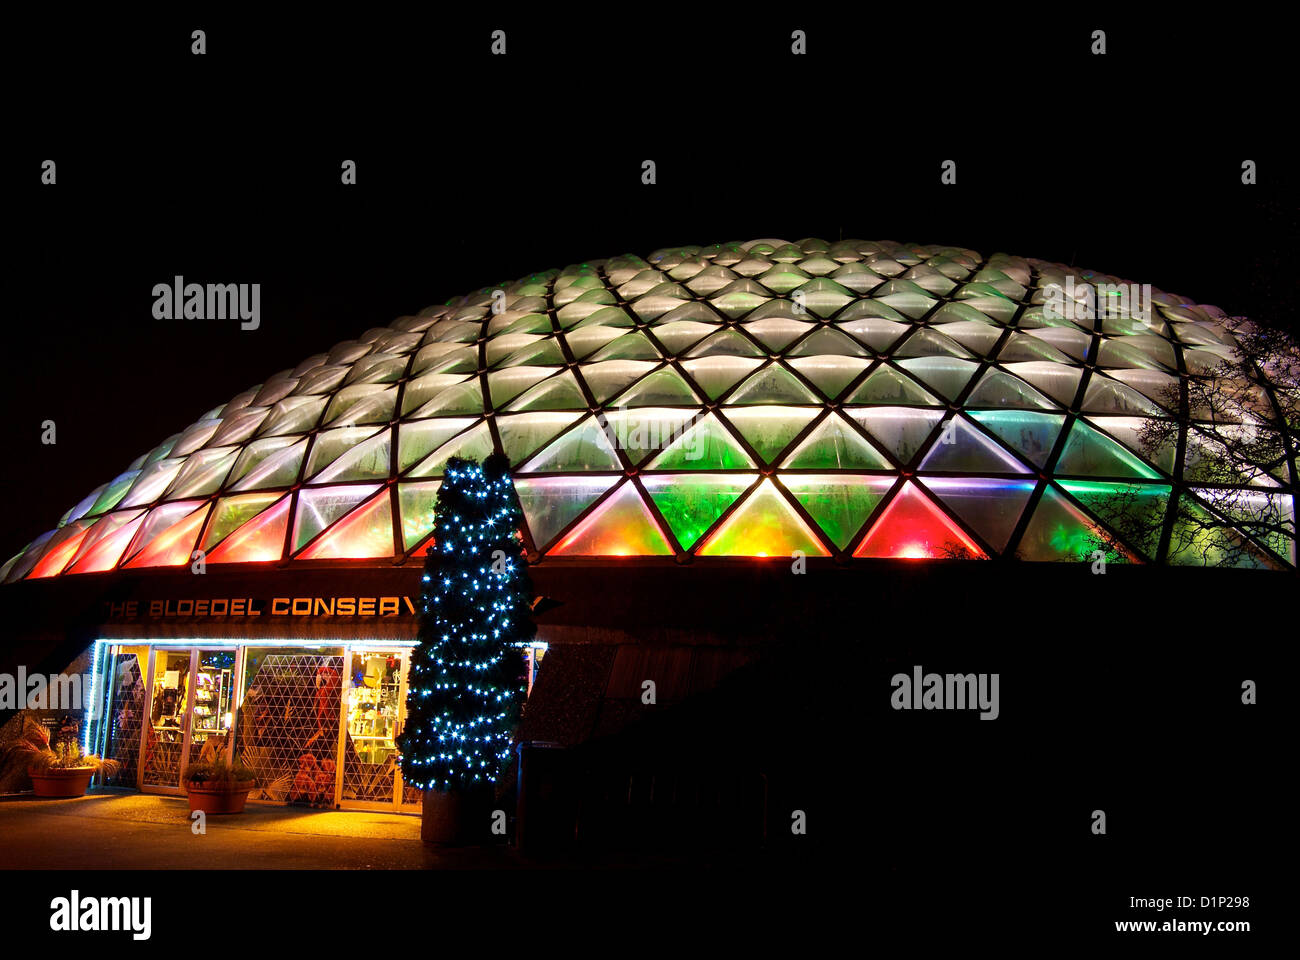 Bloedel Floral Conservatory Queen Elizabeth Park lit at night with Christmas lights Stock Photo